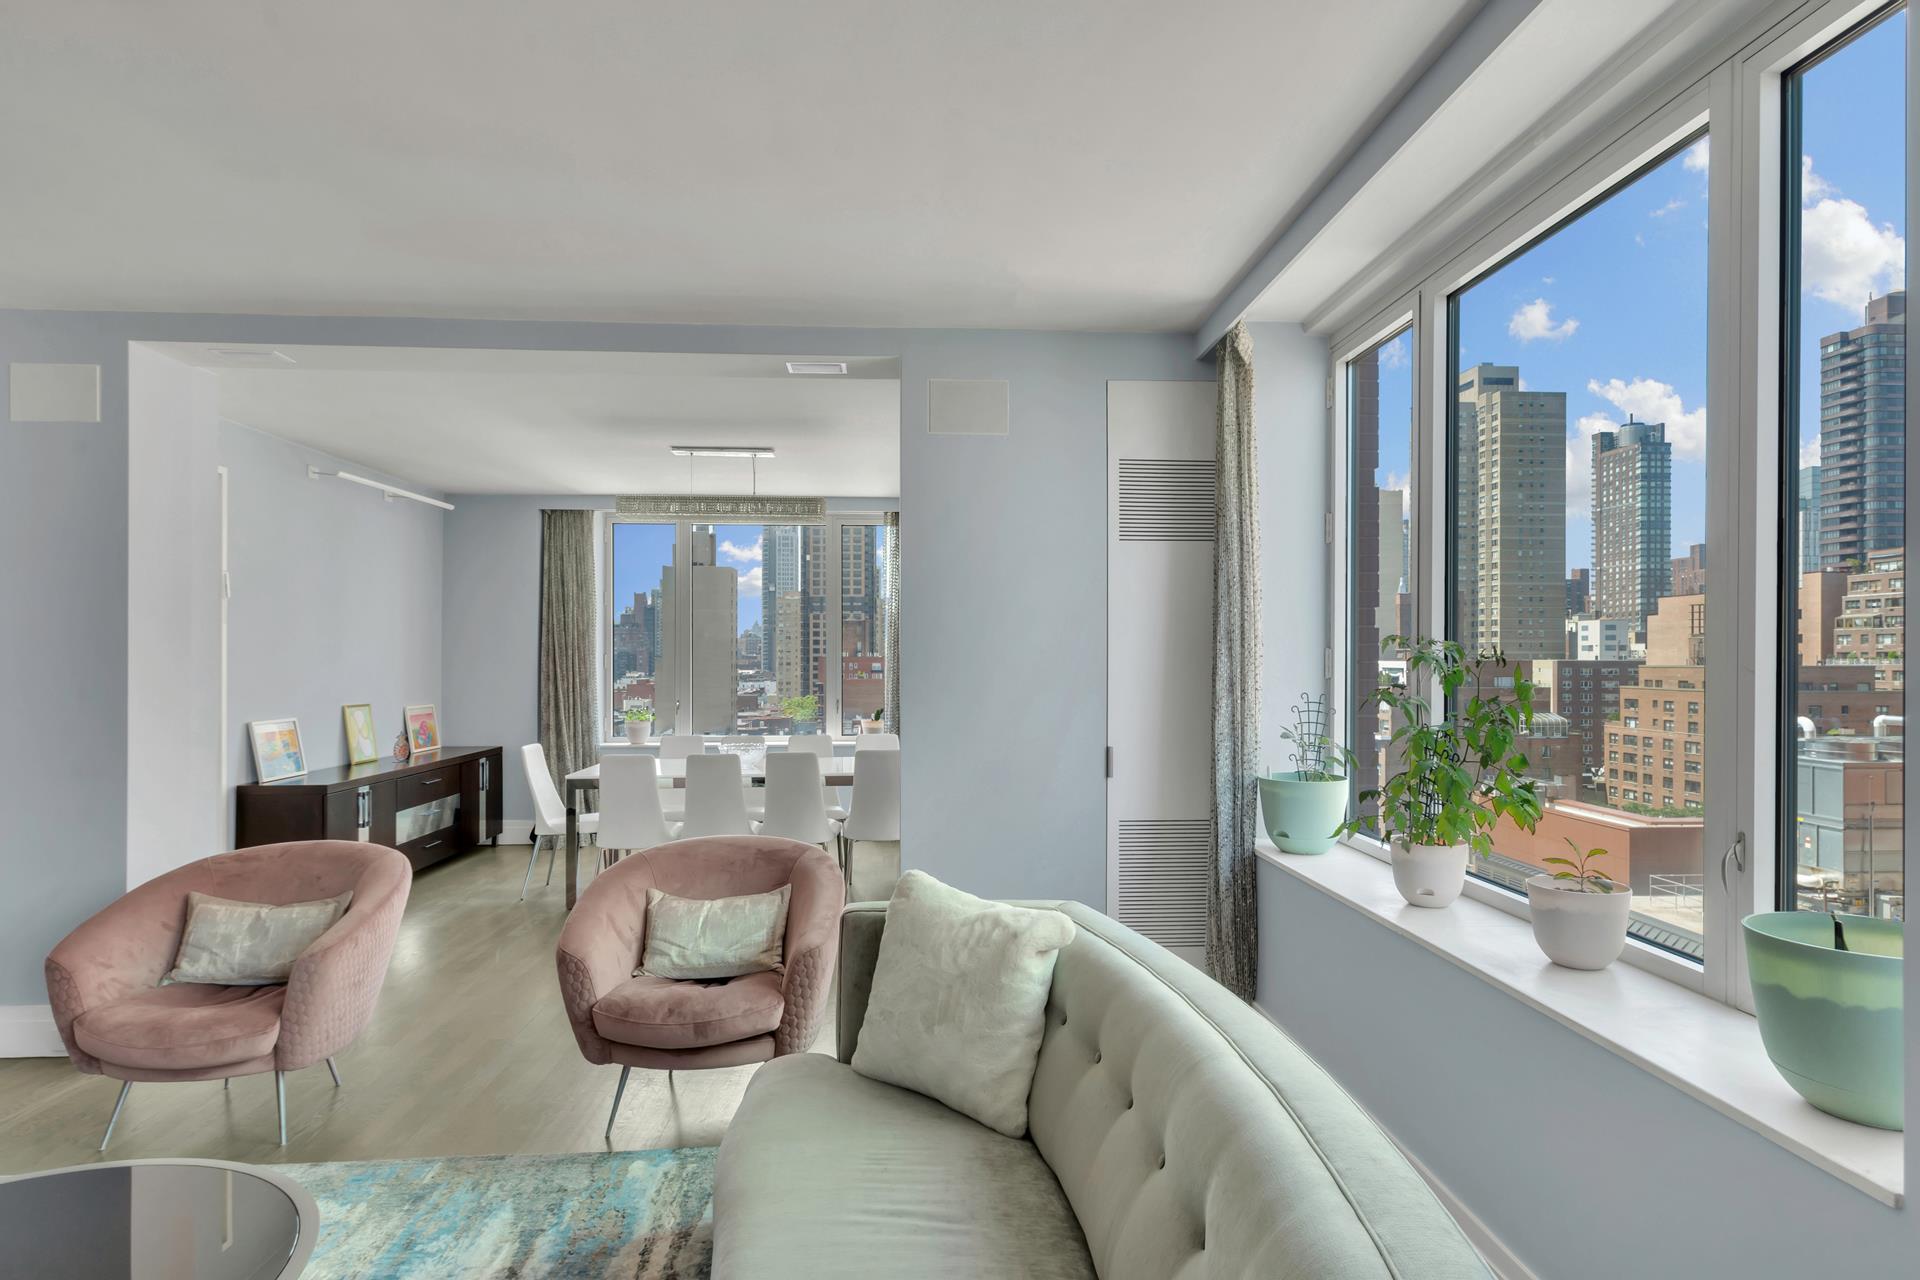 90 East End Avenue 14B, Yorkville, Upper East Side, NYC - 3 Bedrooms  
3 Bathrooms  
6 Rooms - 